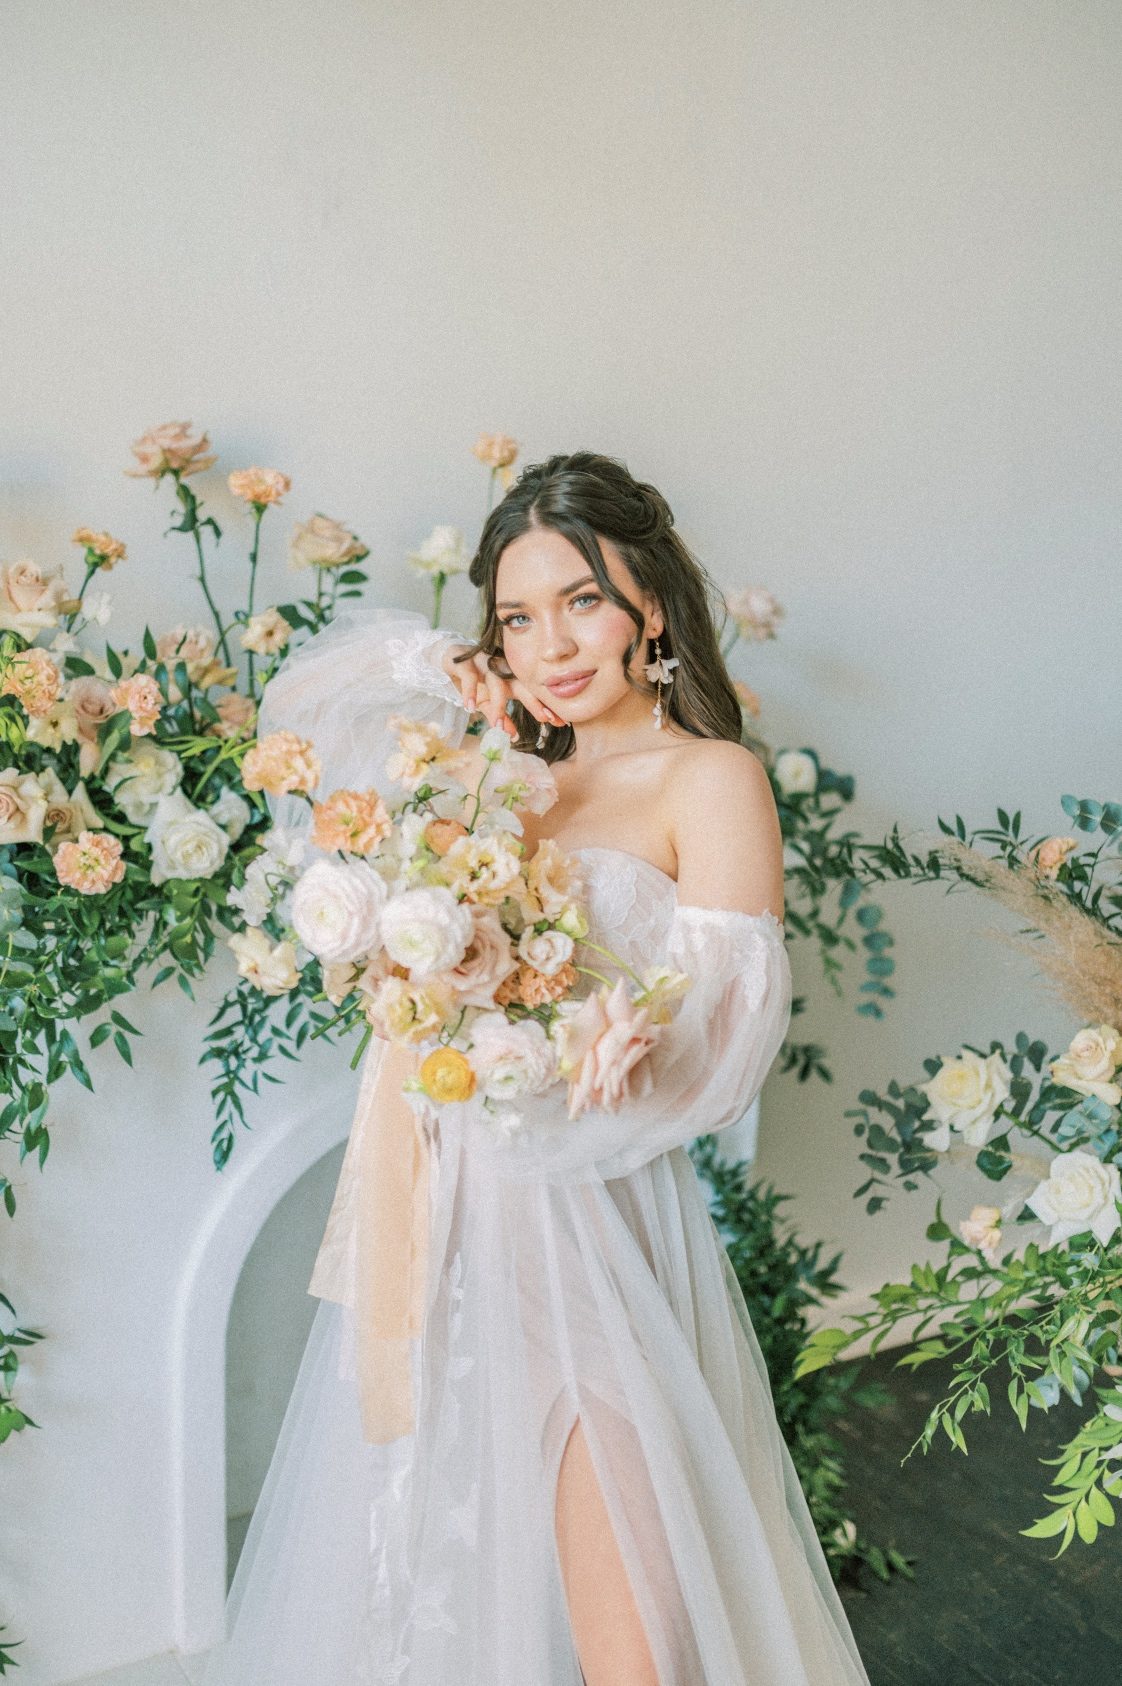 Our model standing in front of a faux fireplace with a large floral arrangement along the mantel, holding up her peach and blush bridal bouquet